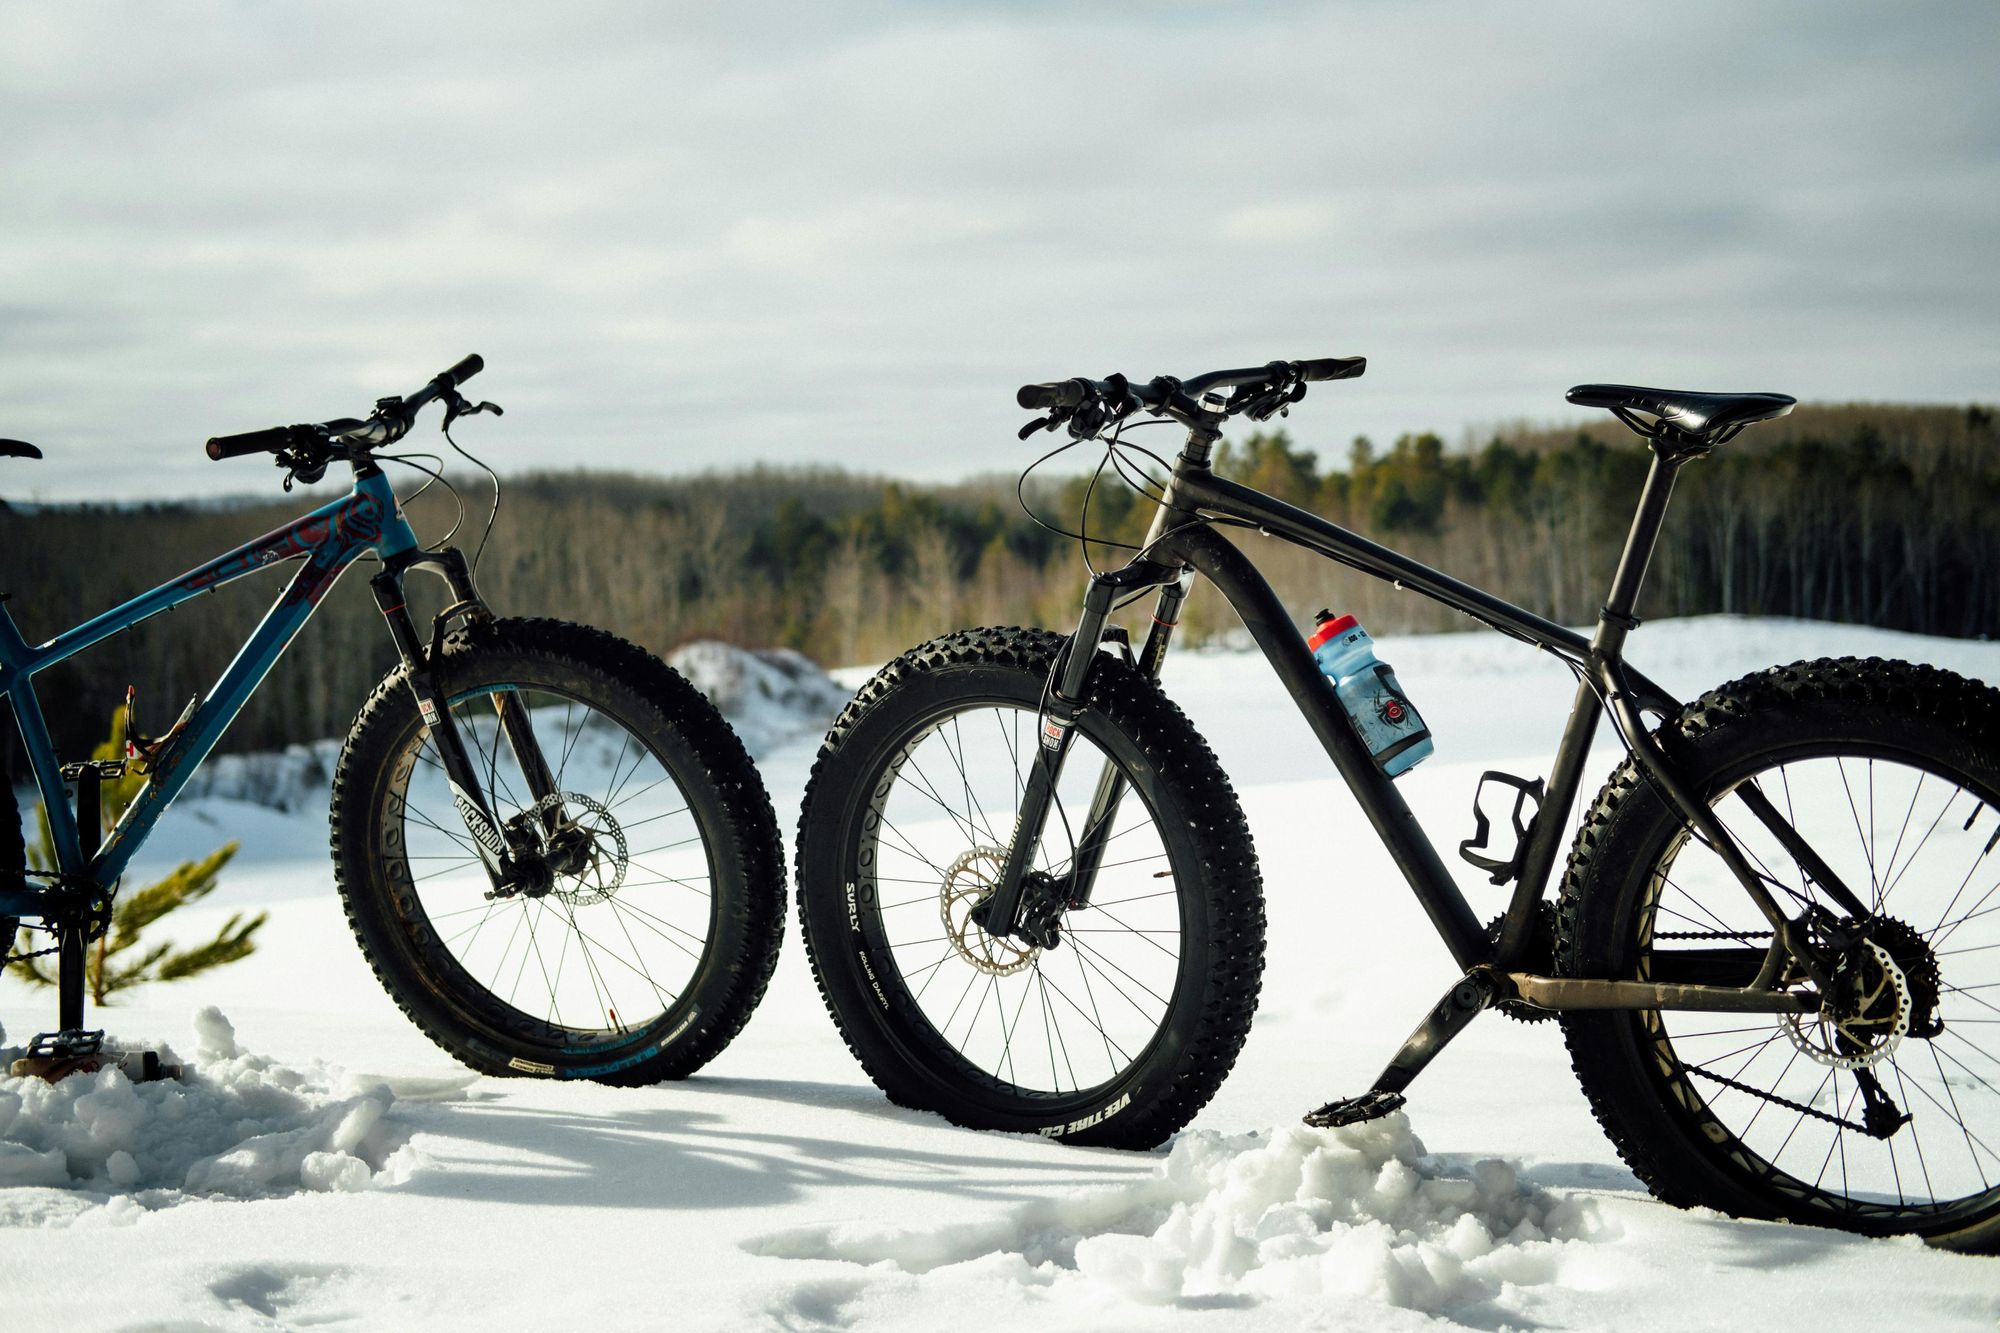 Look at those big wide tyres. Two fat bikes, ready to ride the snow. Photo: Tim Foster (via Unsplash)